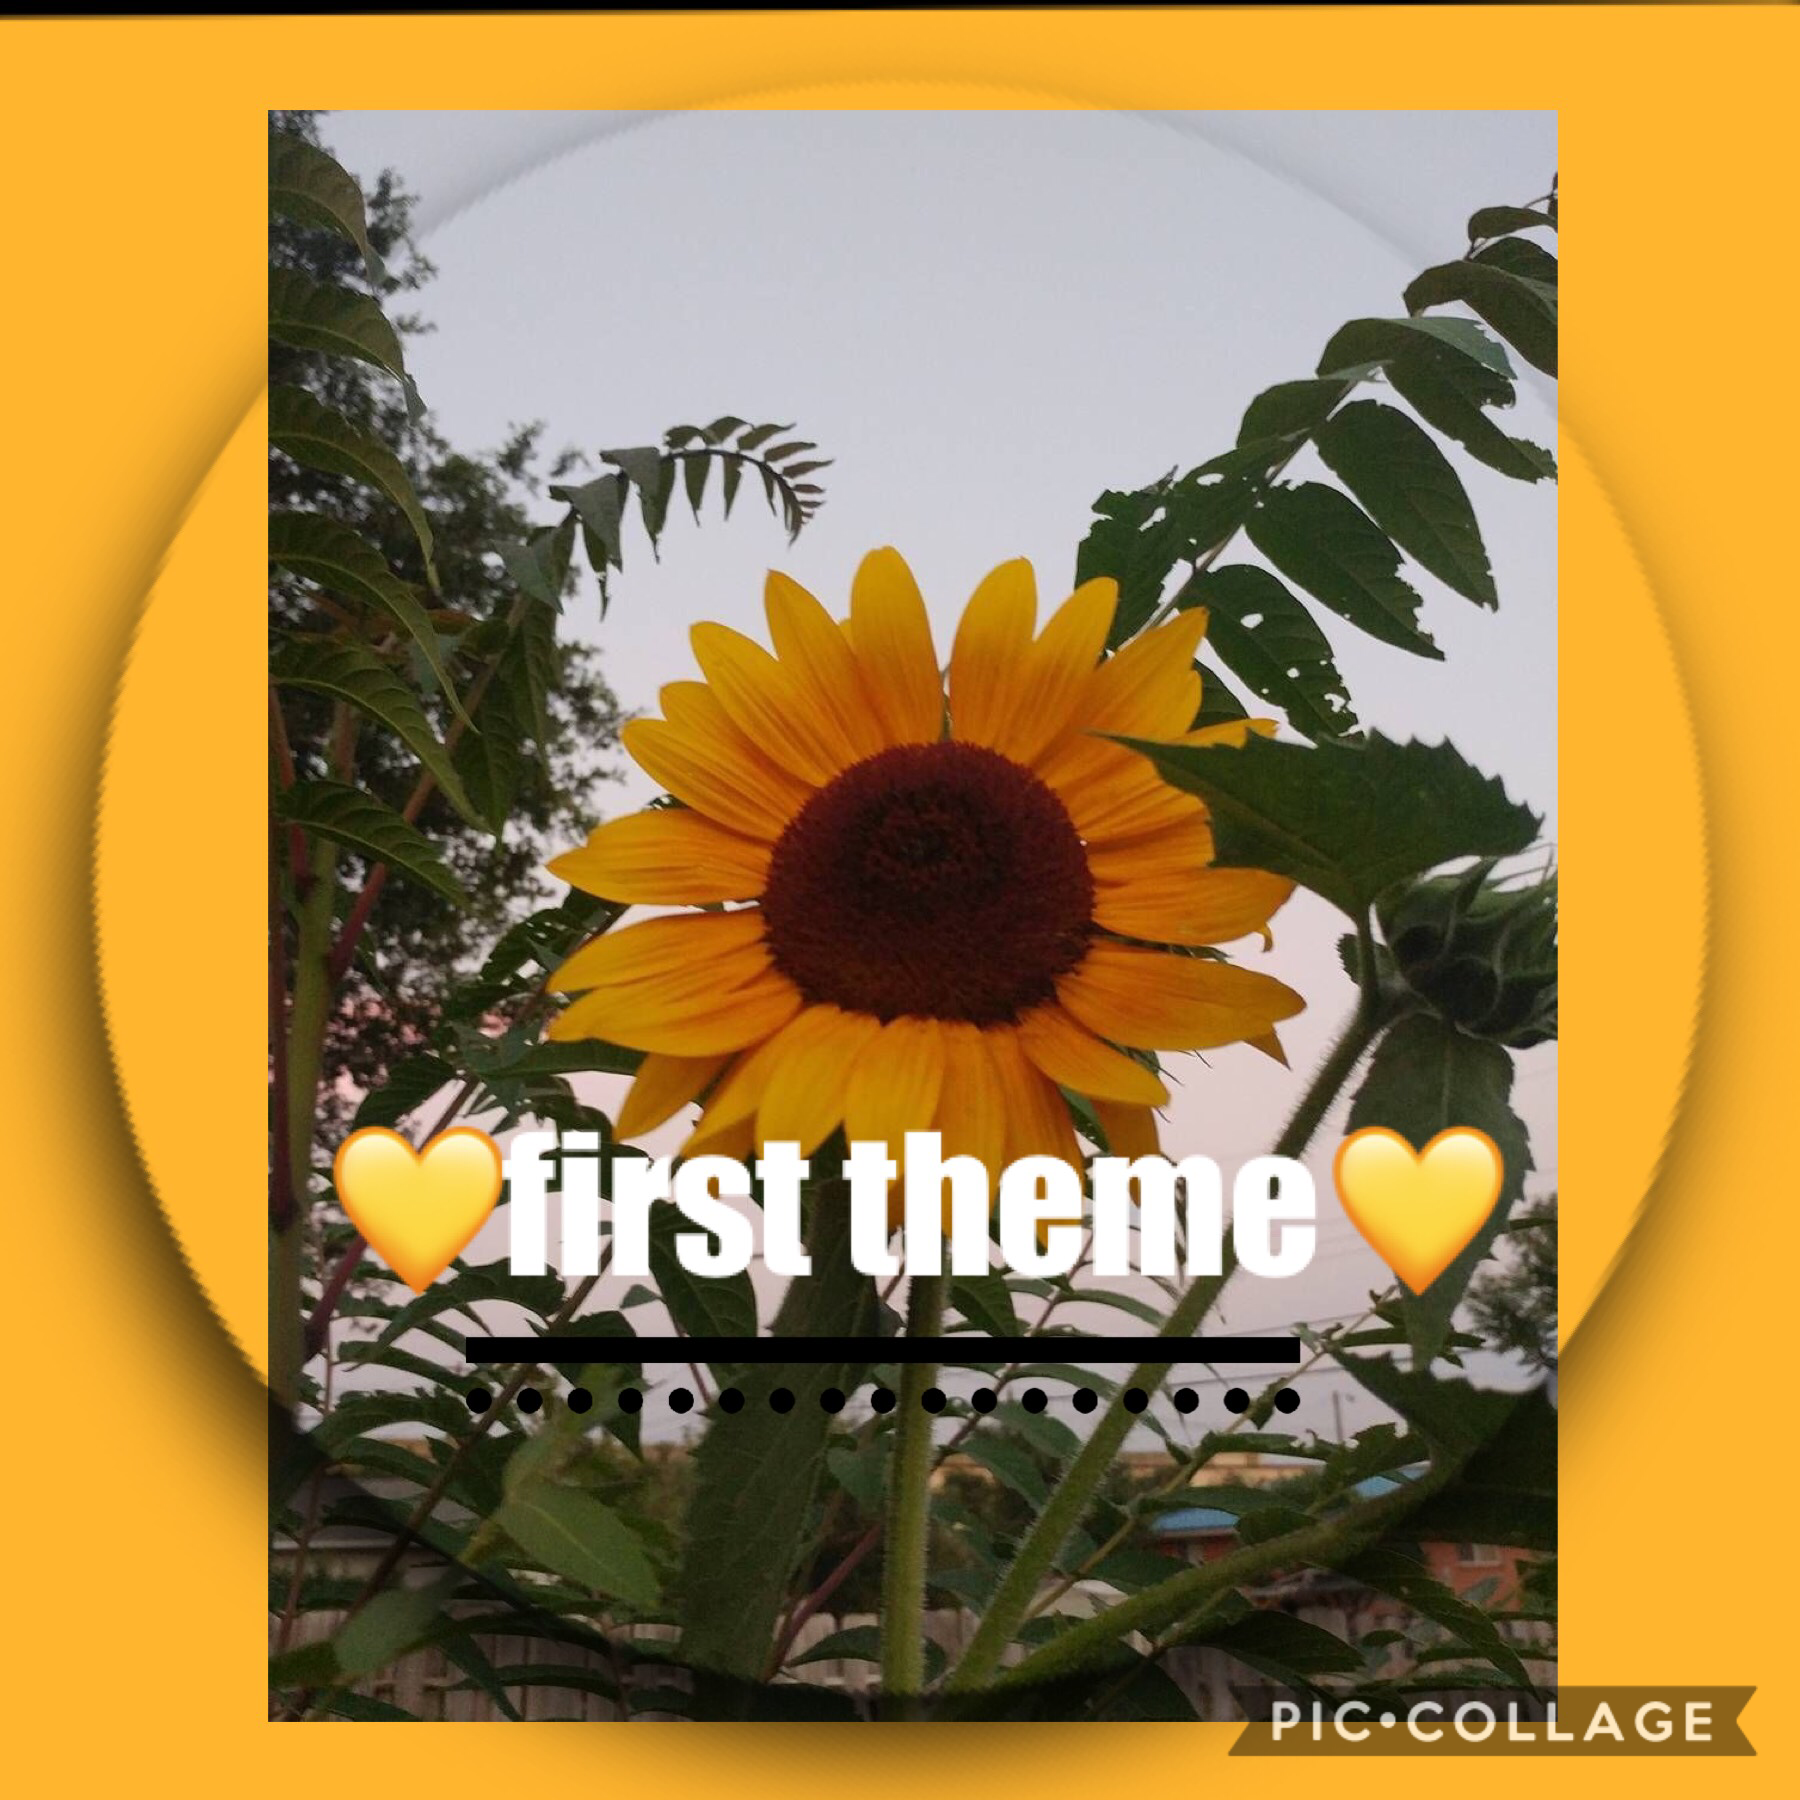 🌻SUNFLOWERS!😂🤤
new theme/first theme 
tell me whatcha think...
should i do more?